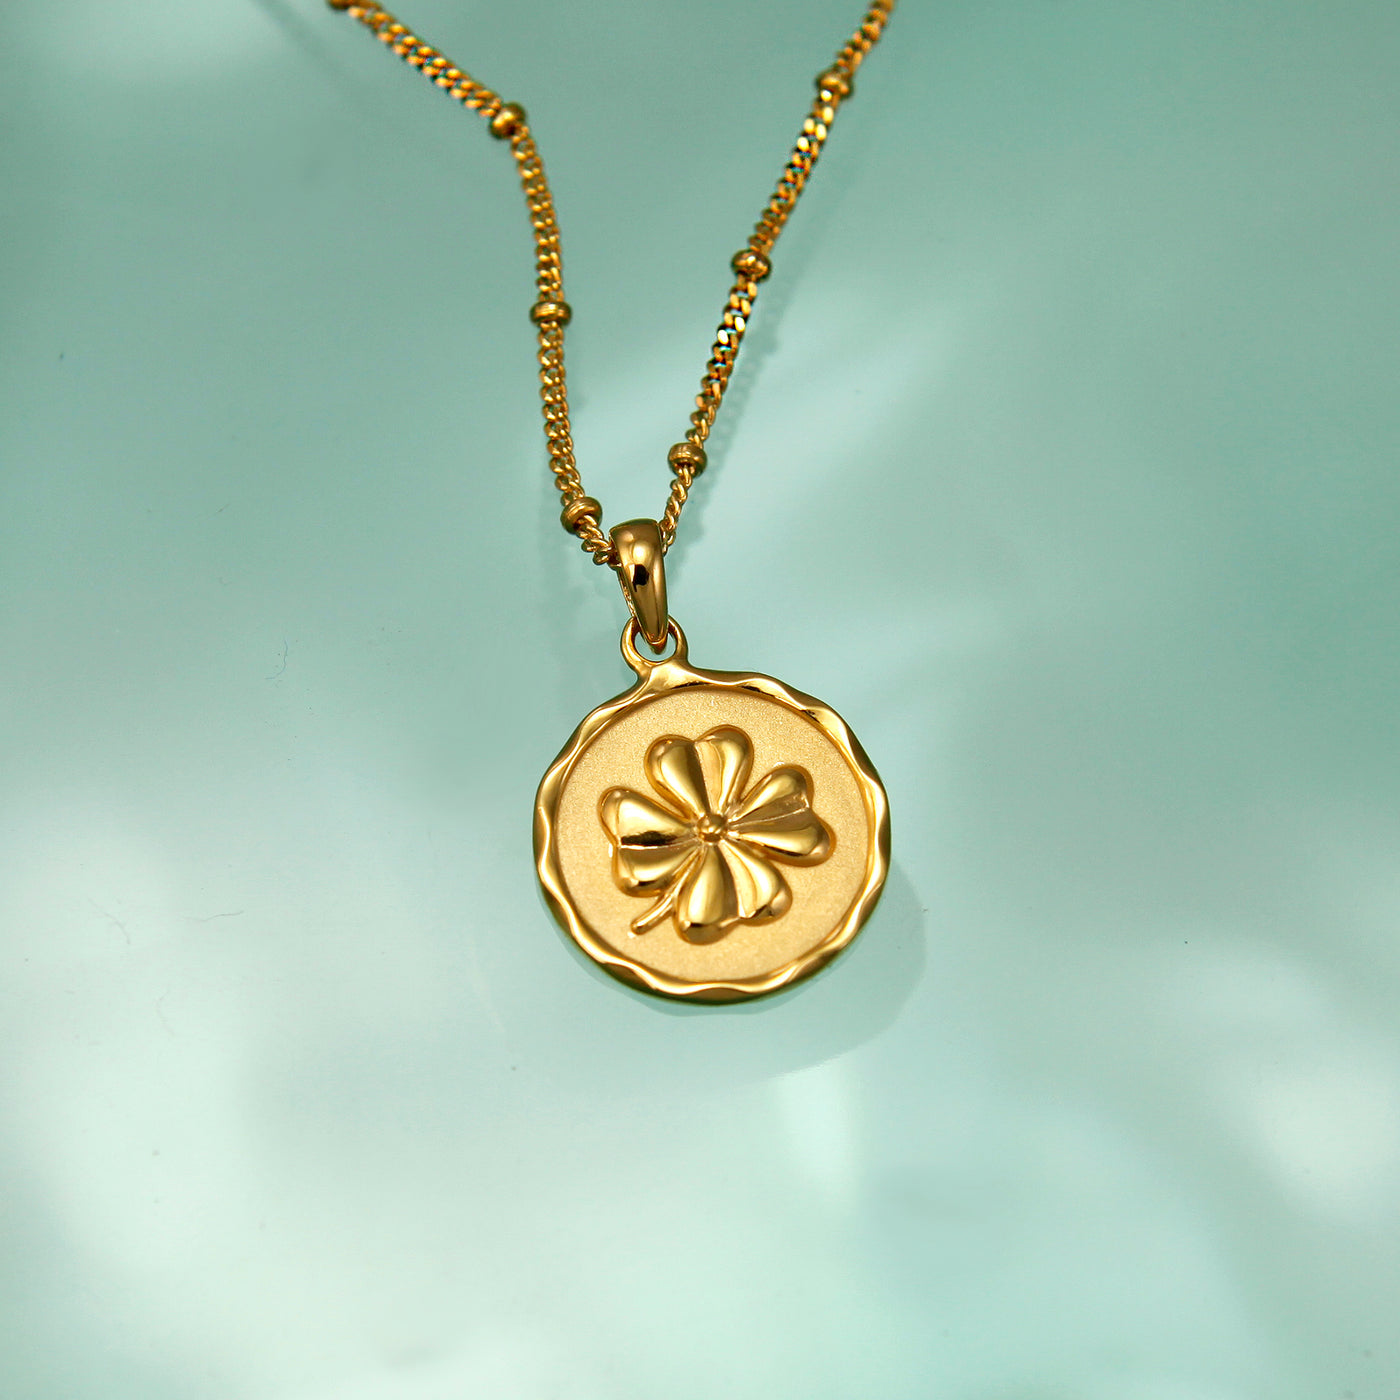 Gold Four-Leaf Clover Lucky Charm Necklace